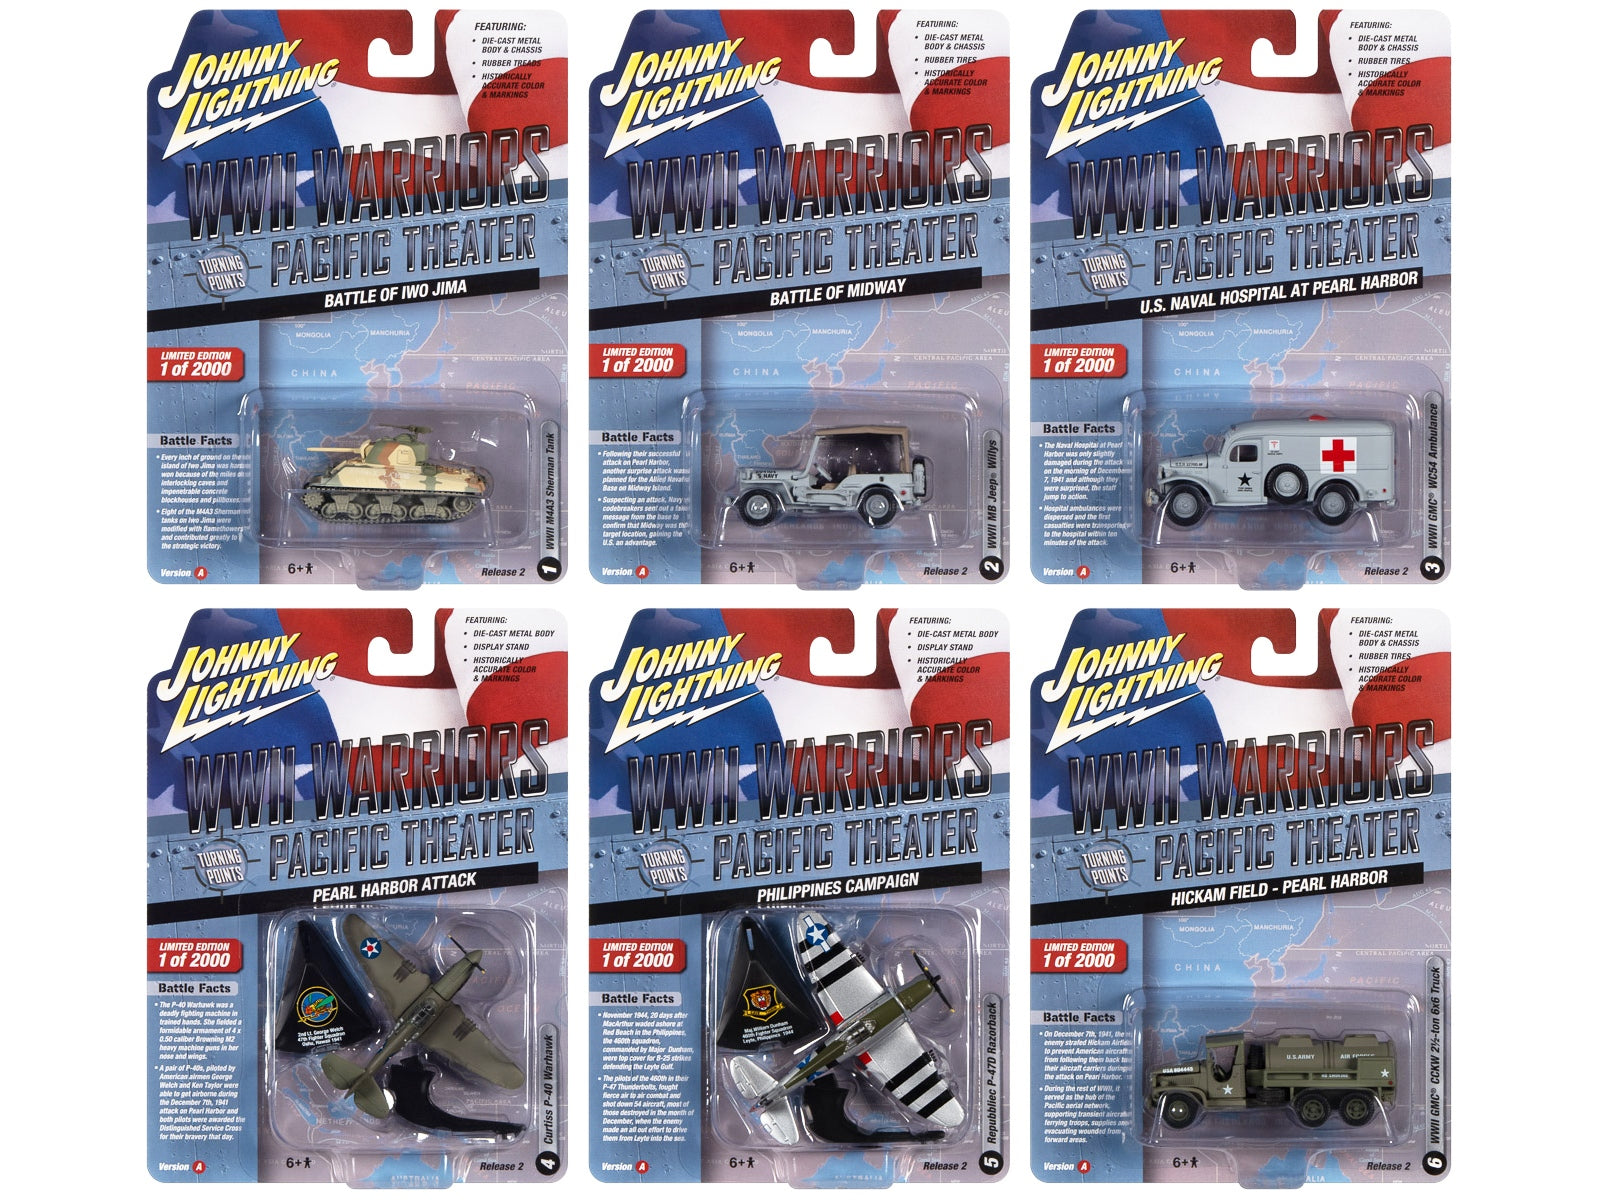 "WWII Warriors: Pacific Theater" Military 2022 Set A of 6 pieces Release